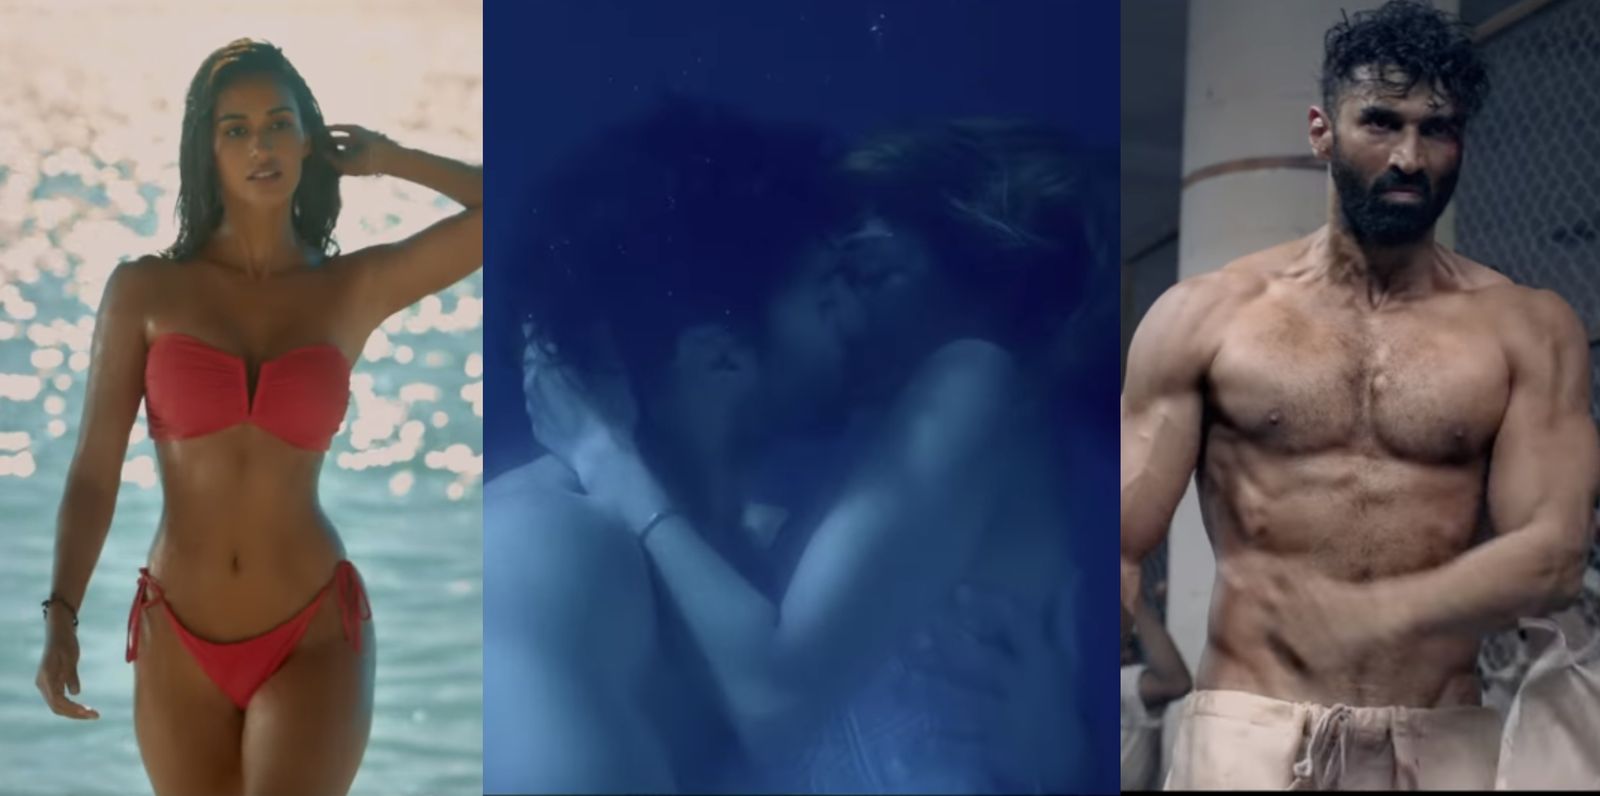 Malang Trailer: Aditya Roy Kapoor And Disha Patani's Chemistry Is The Only Thing Understandable In This ‘Jaanleva’ Hotchpotch!